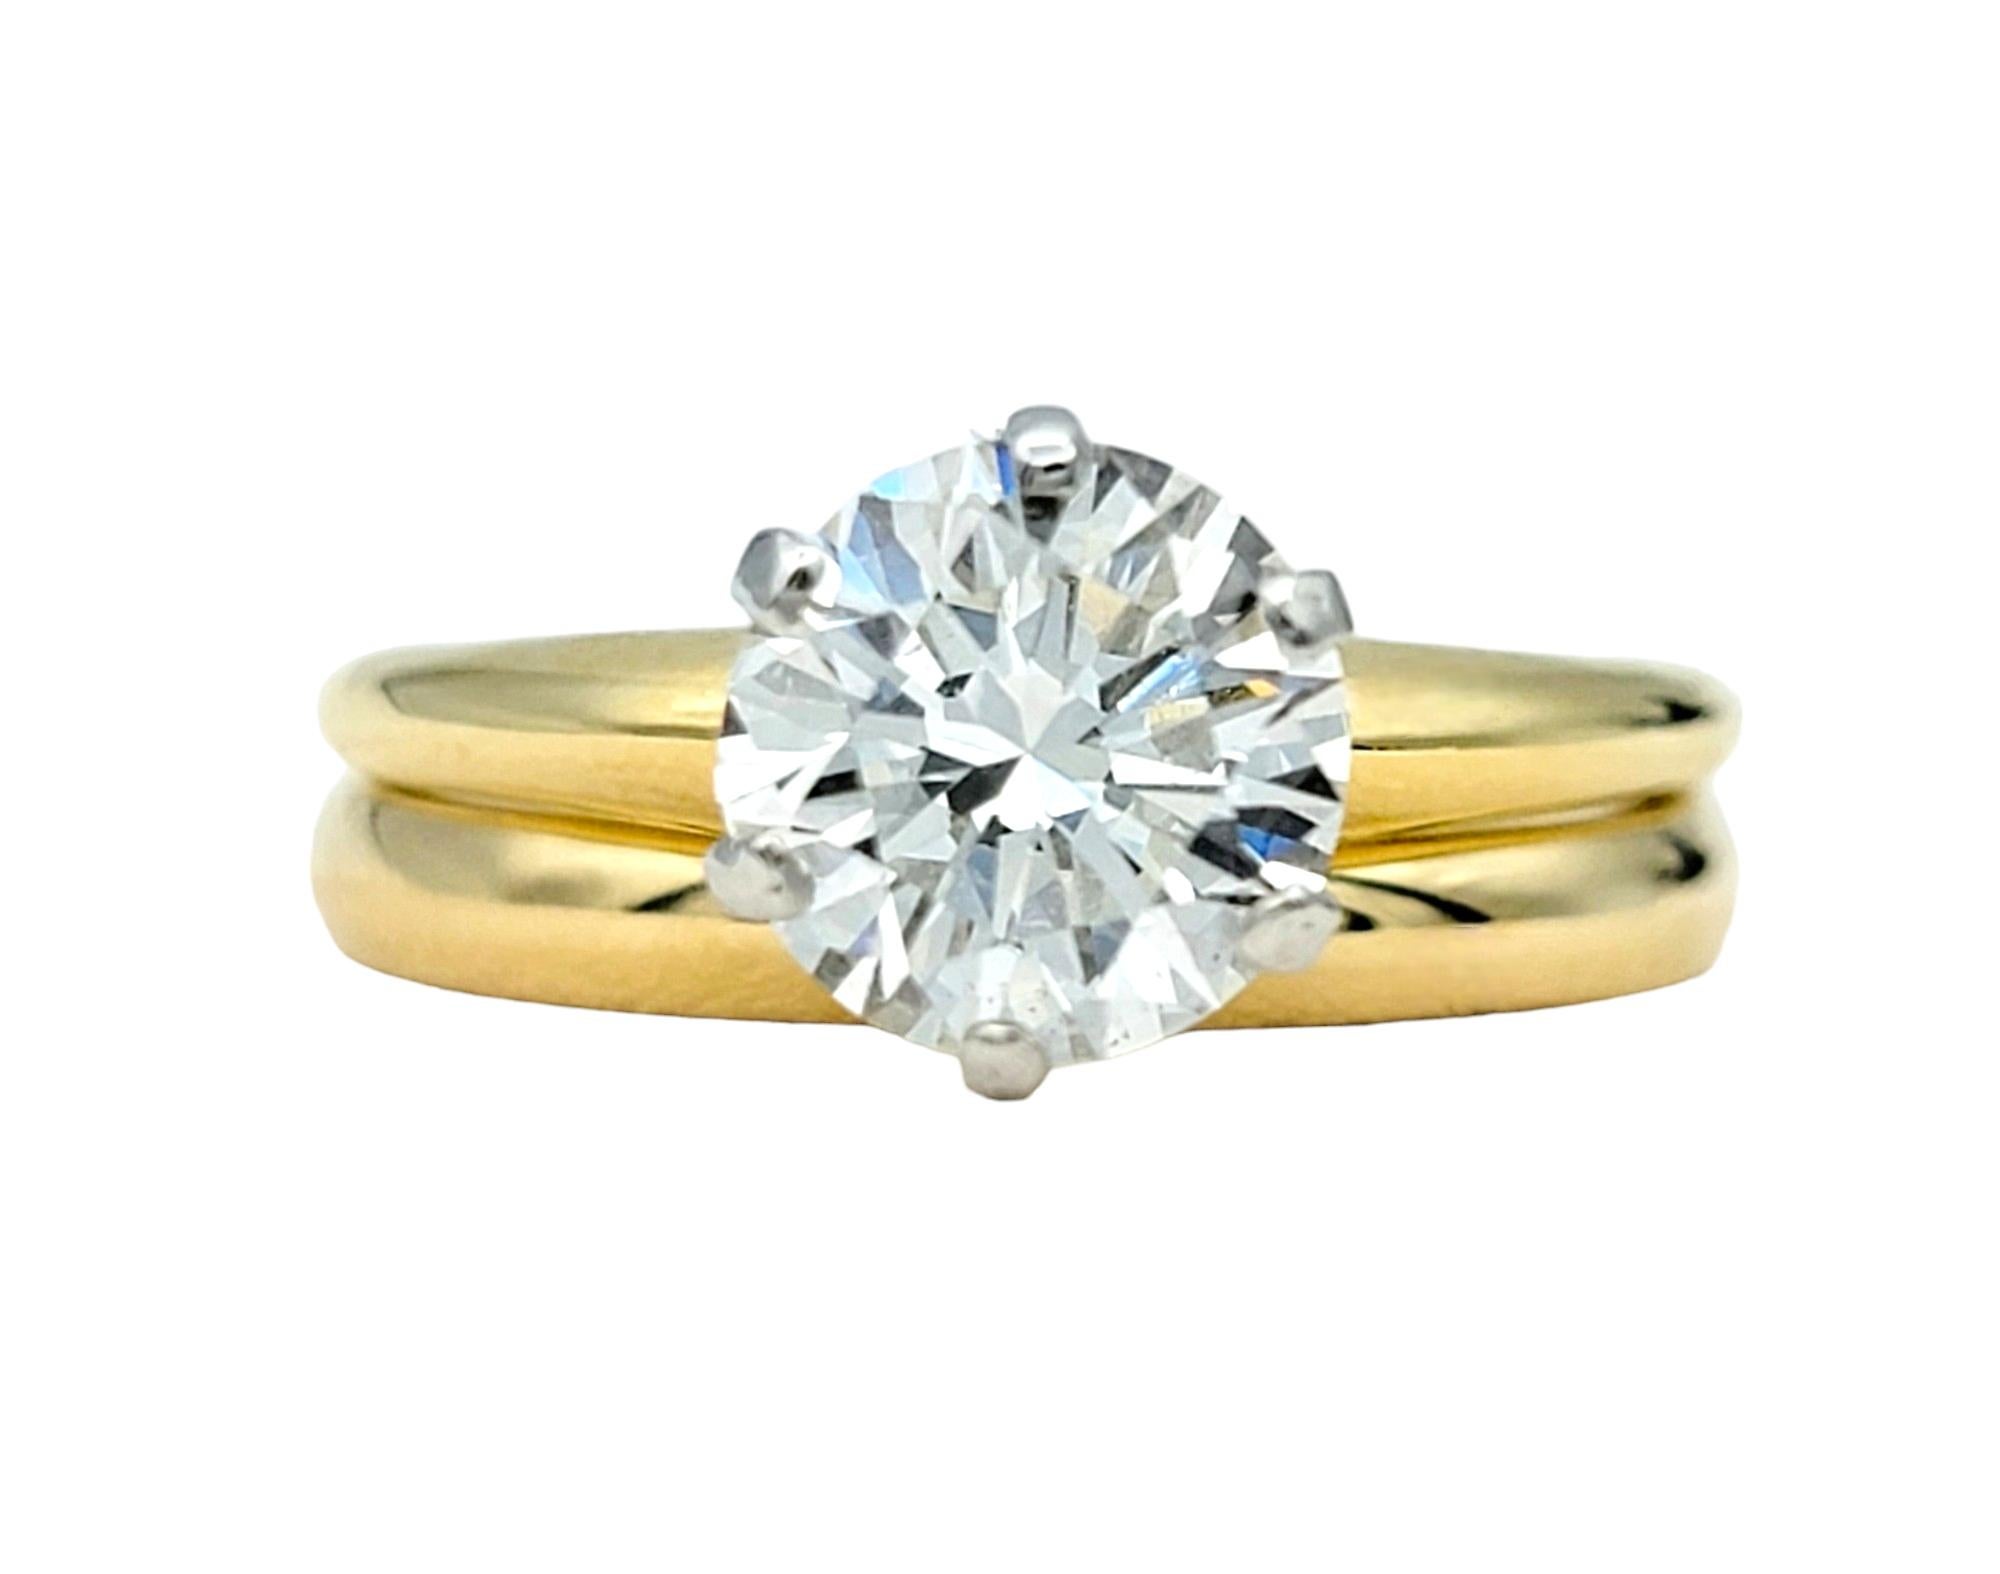 Solitaire Ring Size: 5.25
Band Ring Size: 5

This exquisite Tiffany & Co. solitaire diamond engagement ring and wedding band set, crafted in radiant 18 karat yellow gold, epitomize timeless elegance and sophistication. The classic solitaire diamond